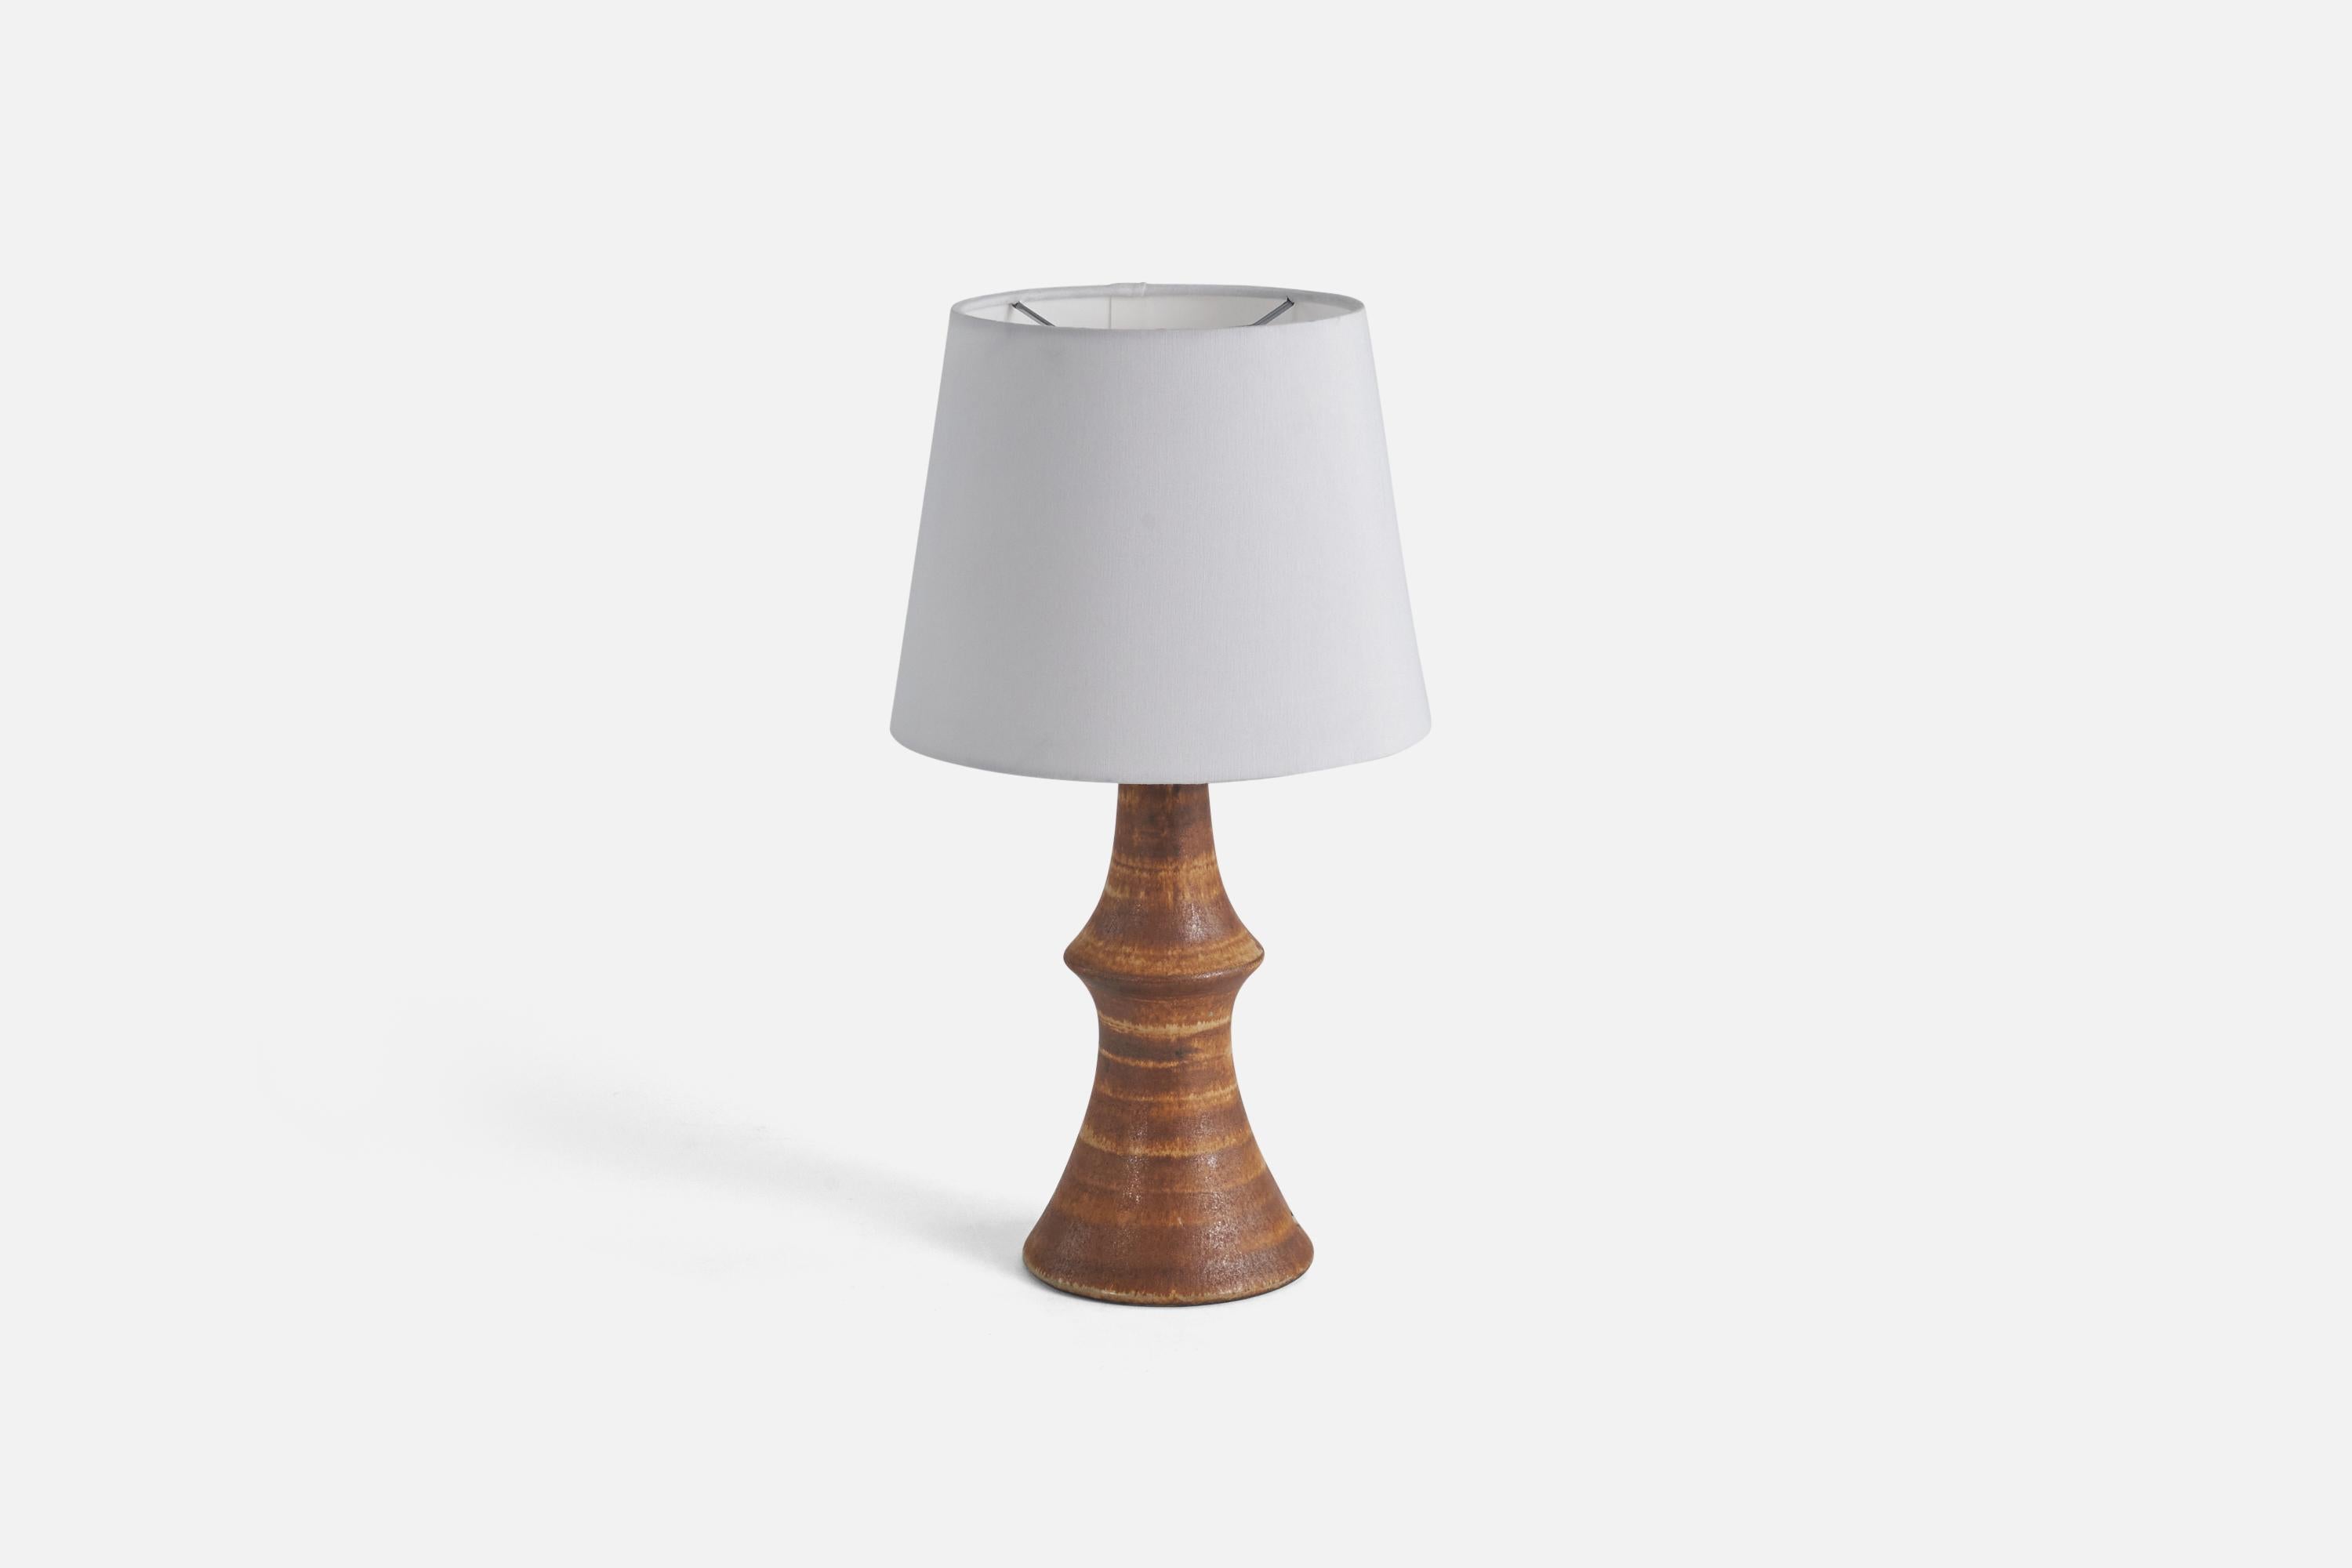 A brown-glazed stoneware table lamp designed by Bruno Karlsson and produced by his studio 